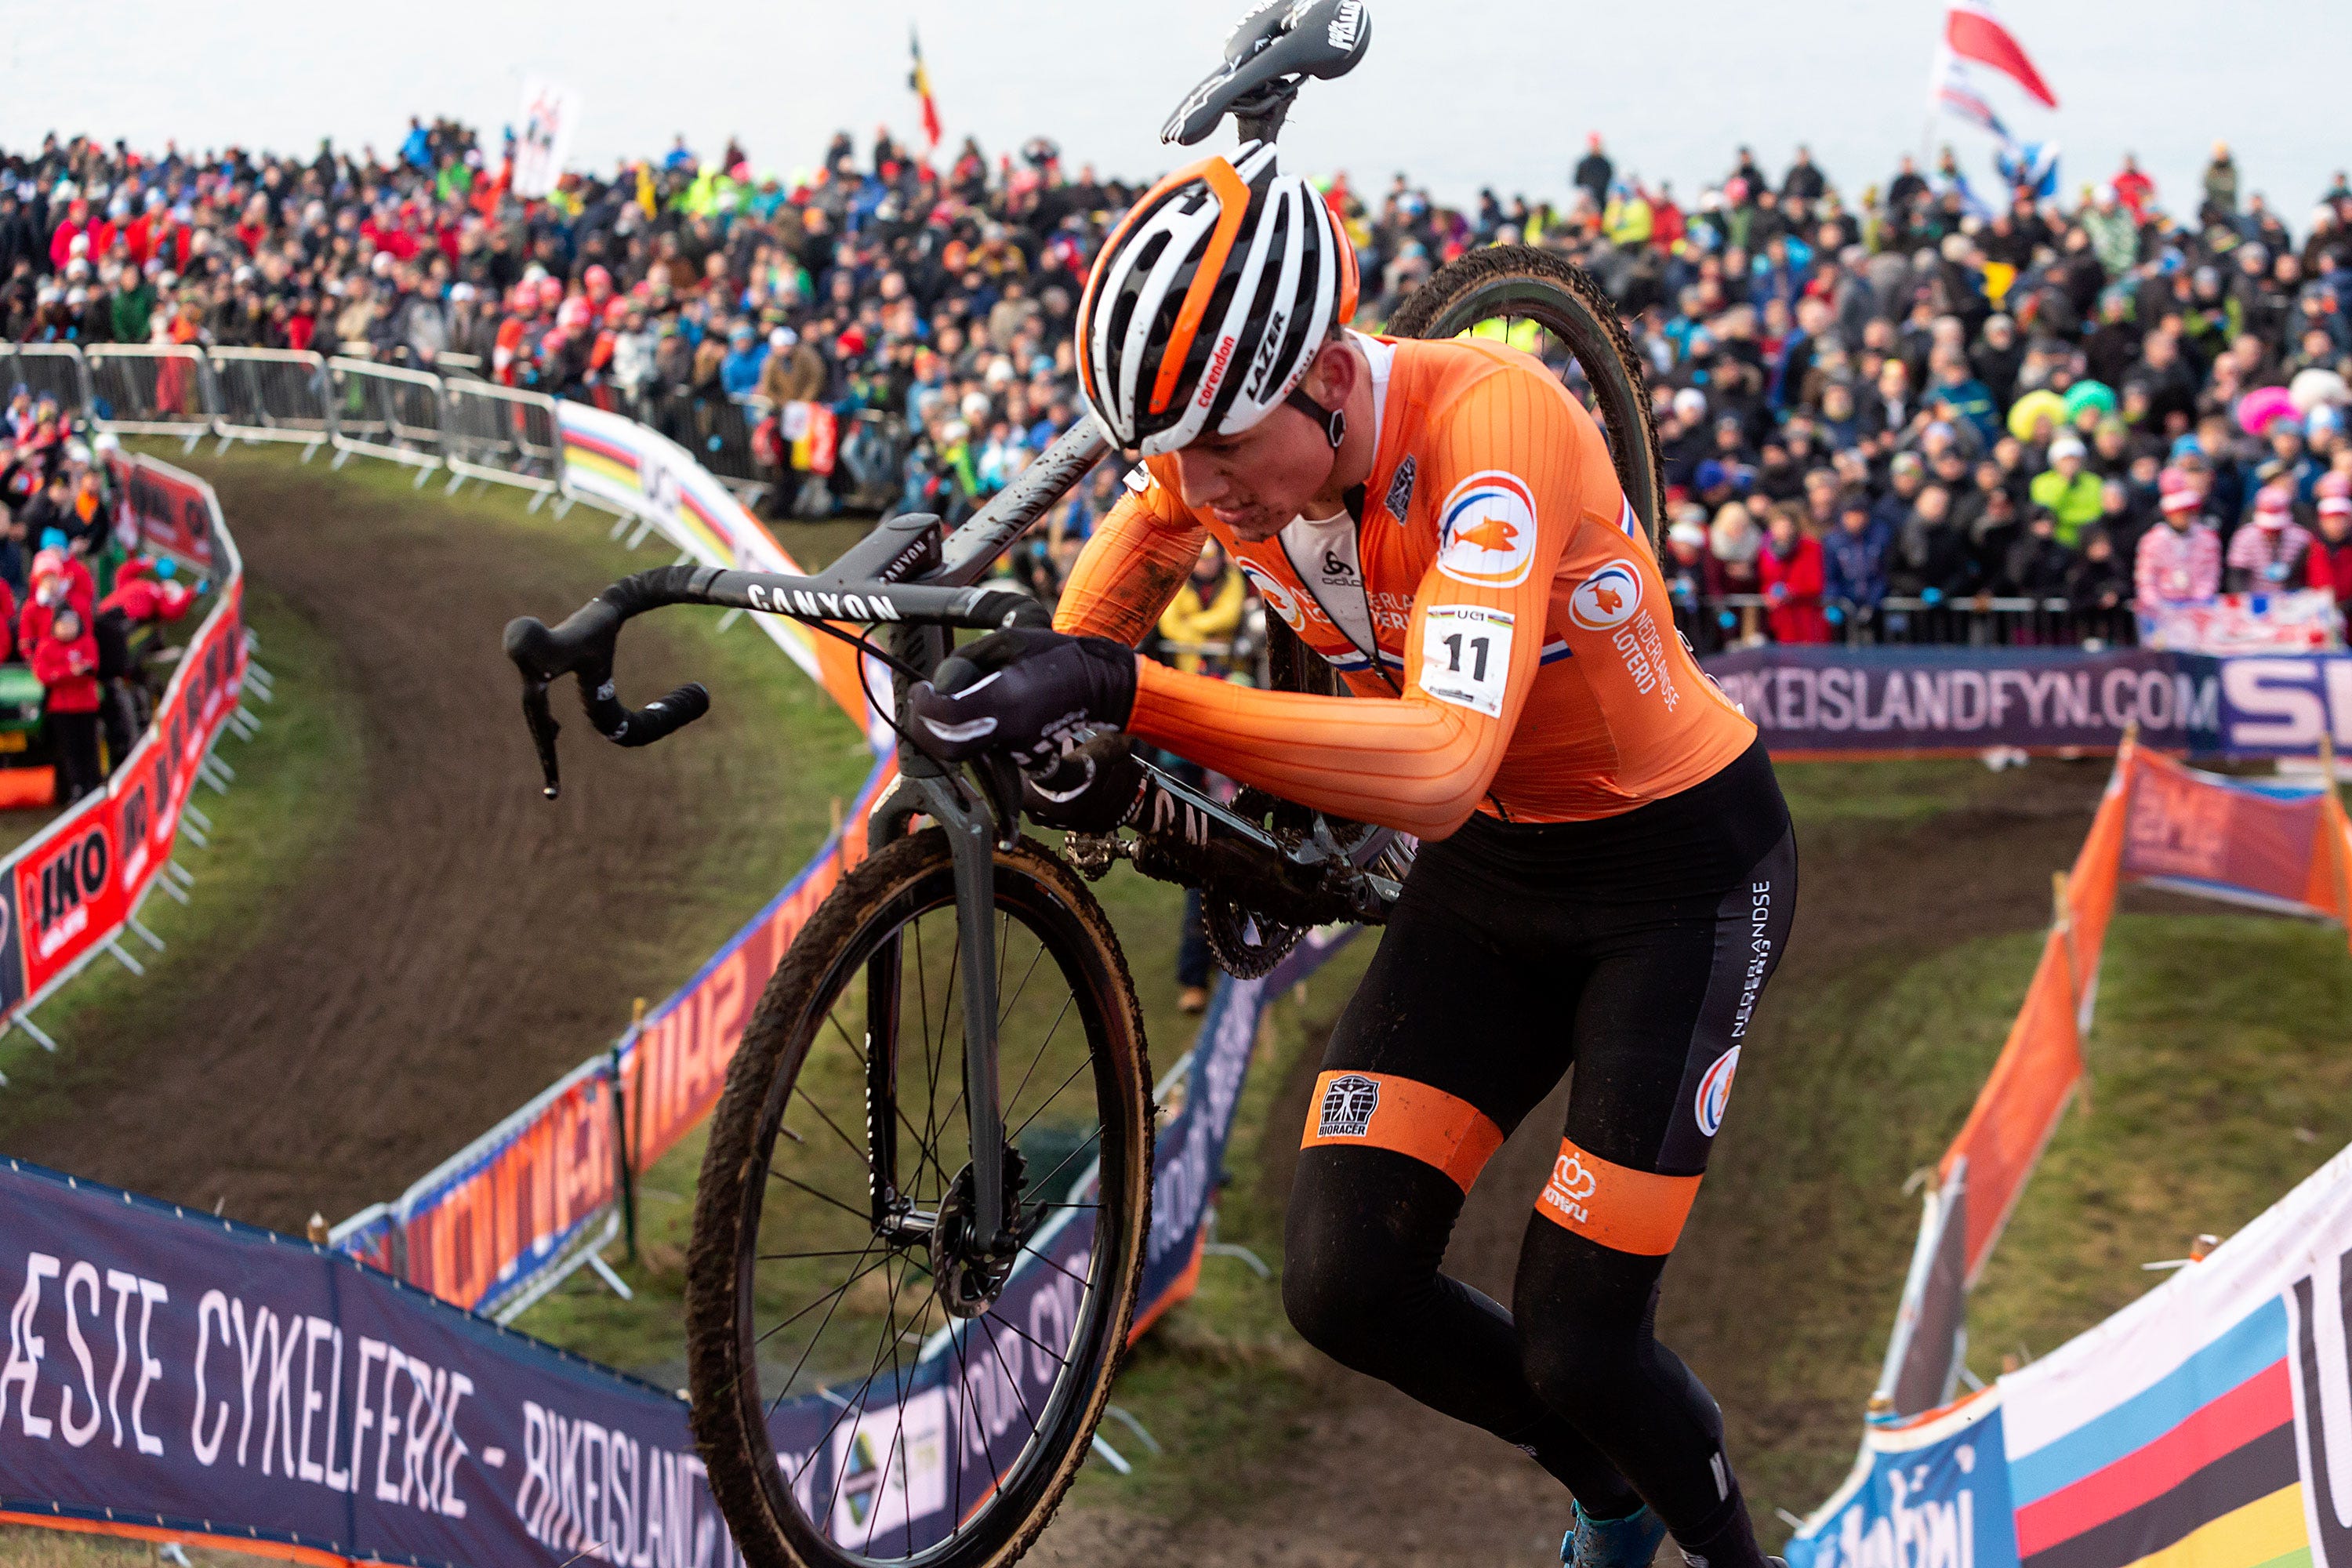 2020 Cyclocross World Championships How to Watch and Livestream